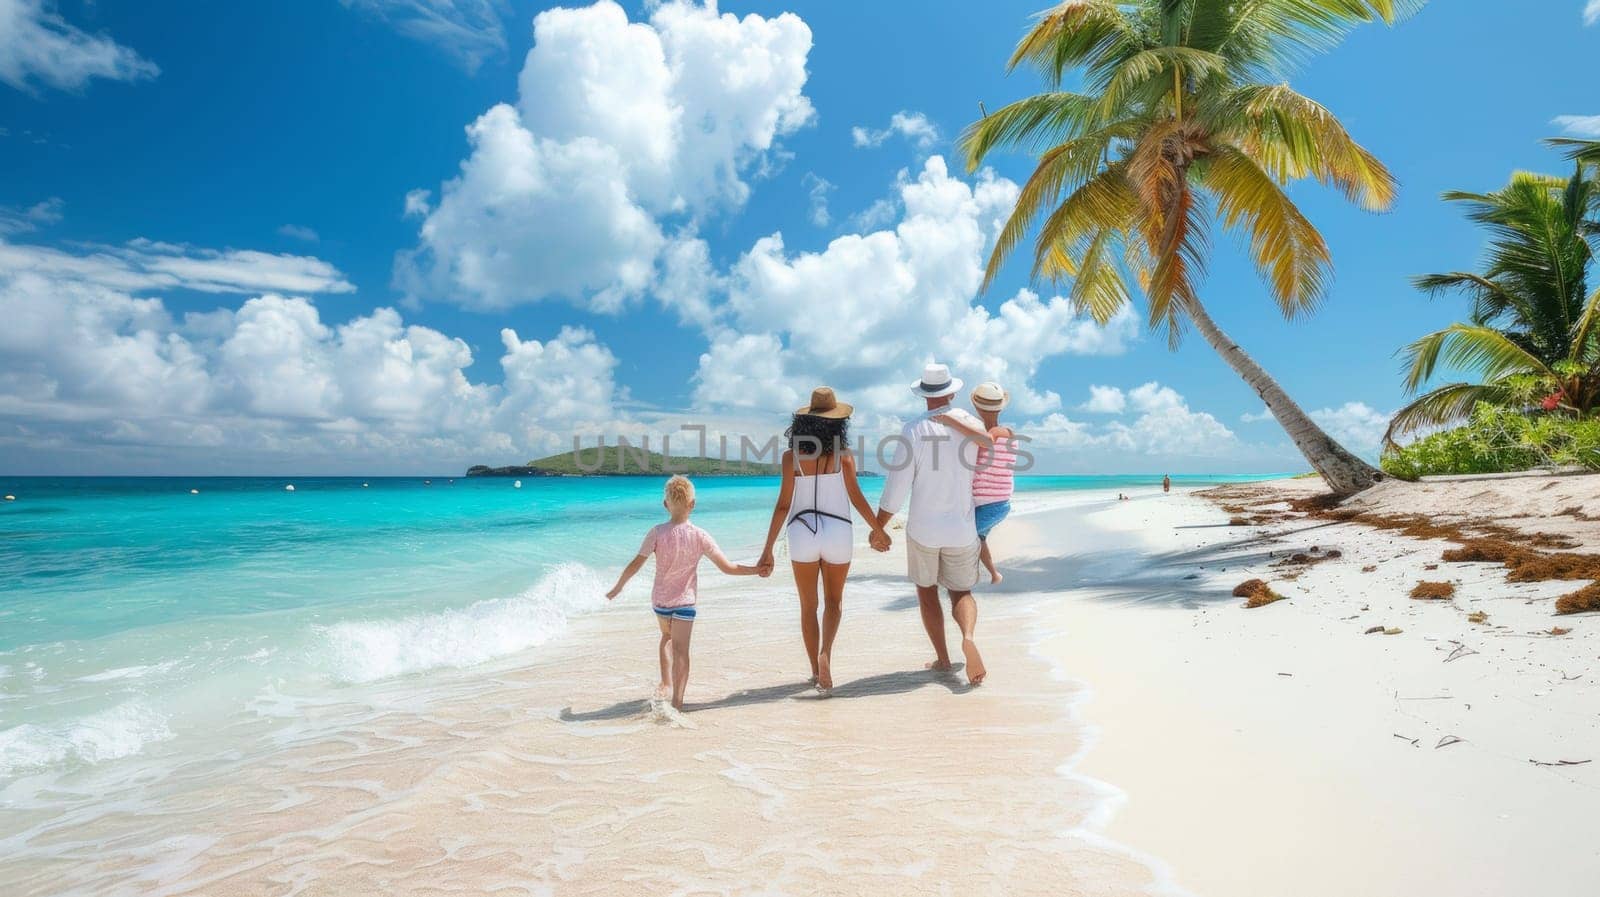 A family walking on a beach with palm trees in the background